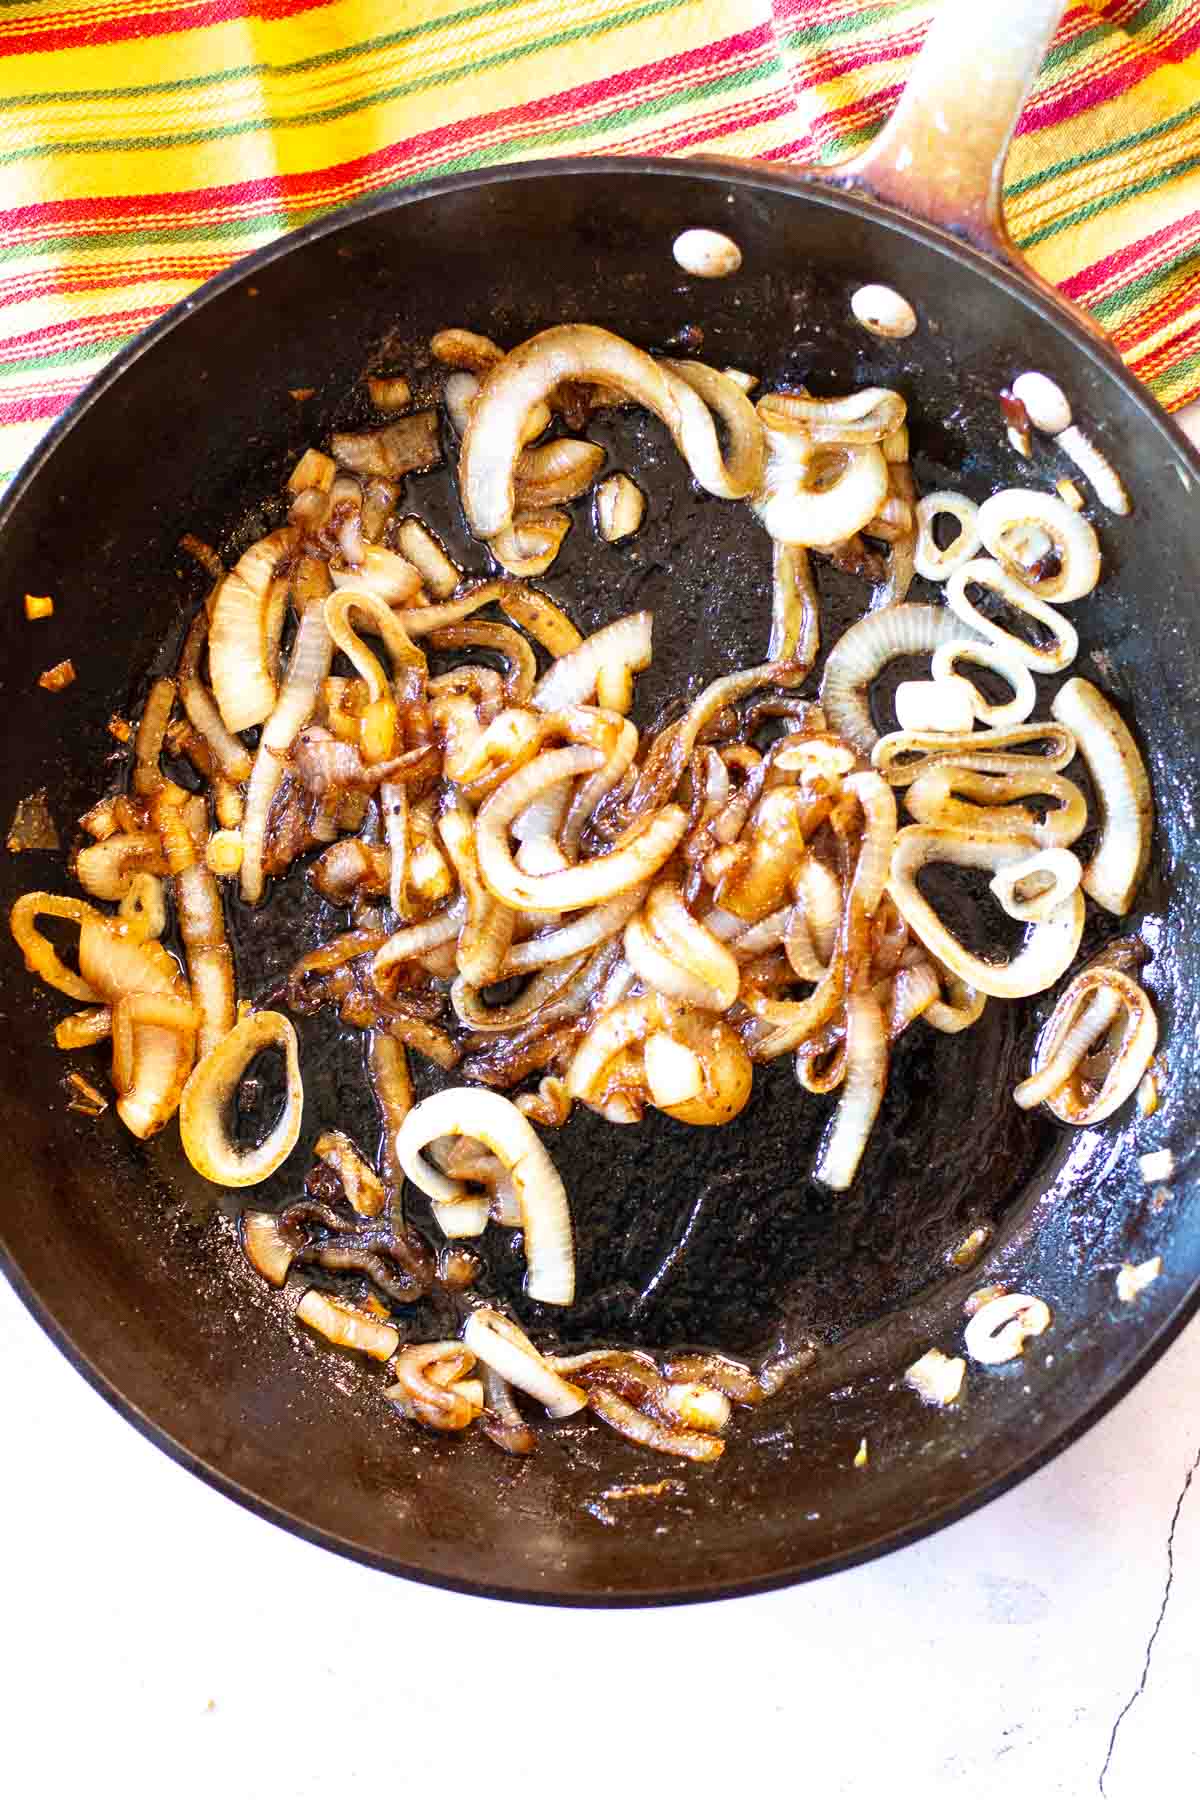 Caramelizing onions in a large fry pan to make a caramelized onion tart.